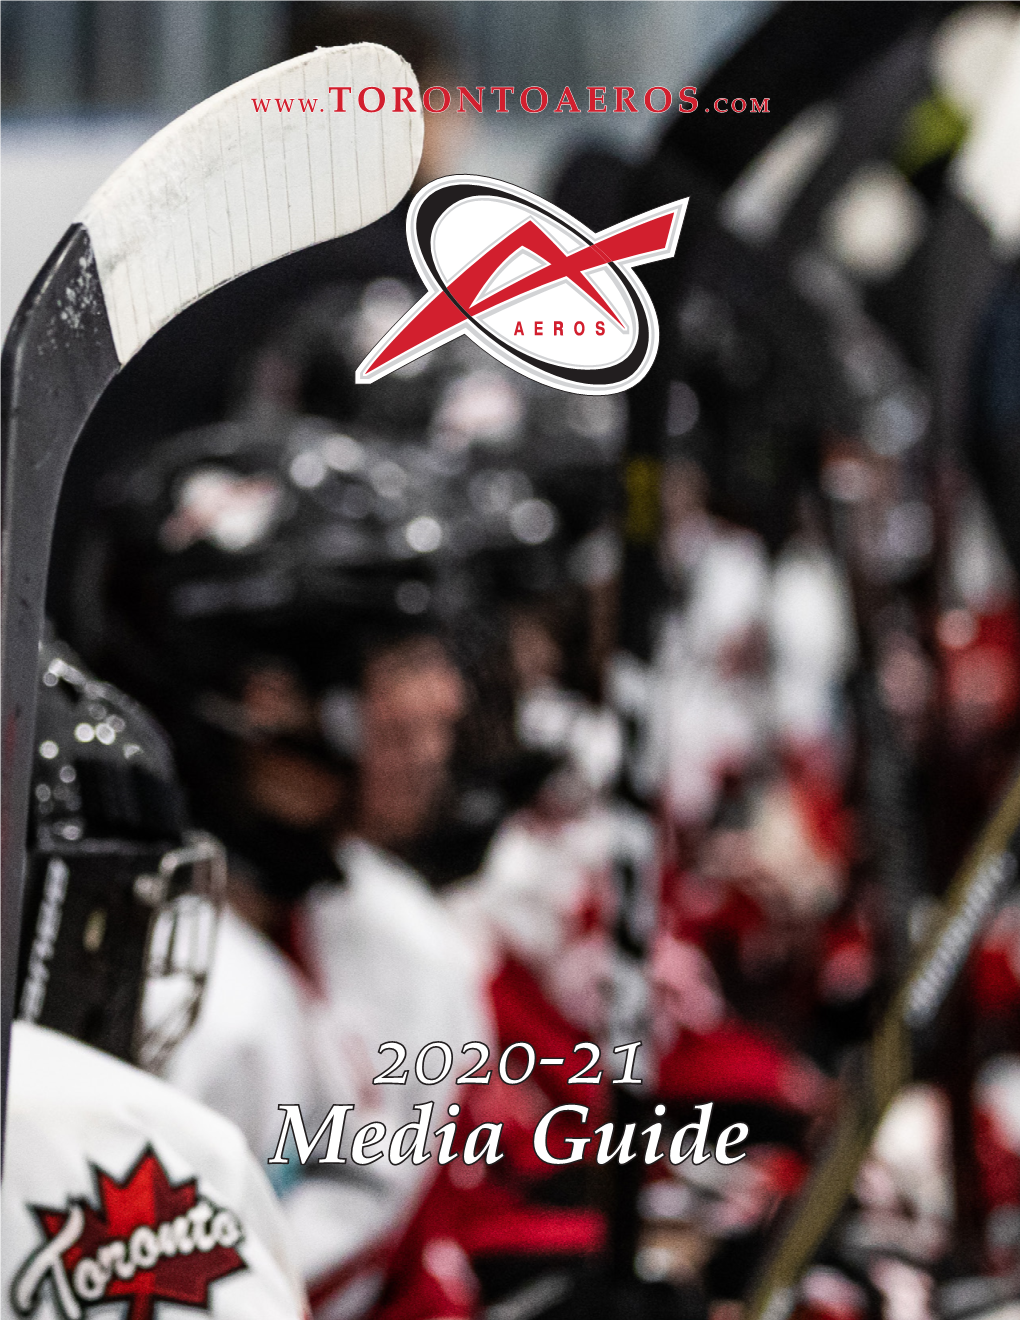 2020-21 Media Guide a Tradition of Excellence the Toronto Aeros Have a Long-Established Reputation for Success That Other Organizations Have Aspired to Emulate